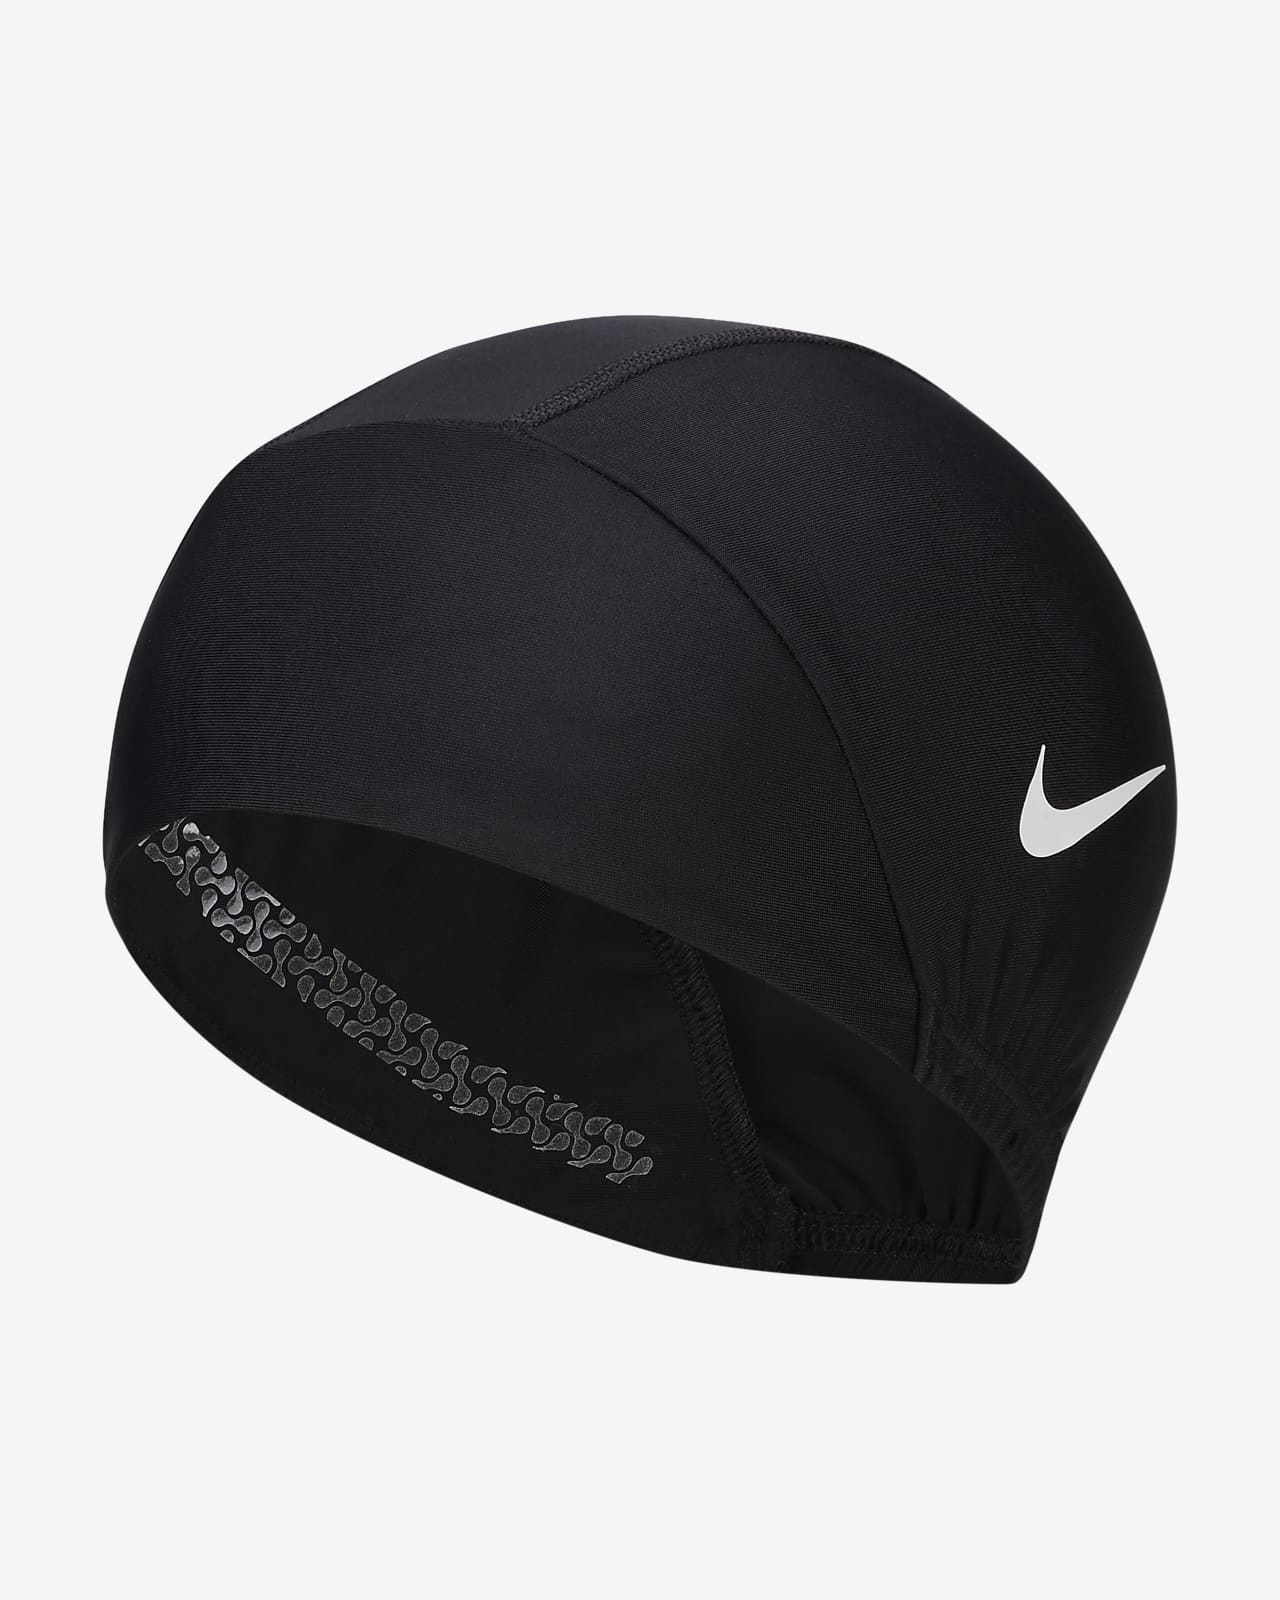 Nike Victory Women's Swimming Head Covering